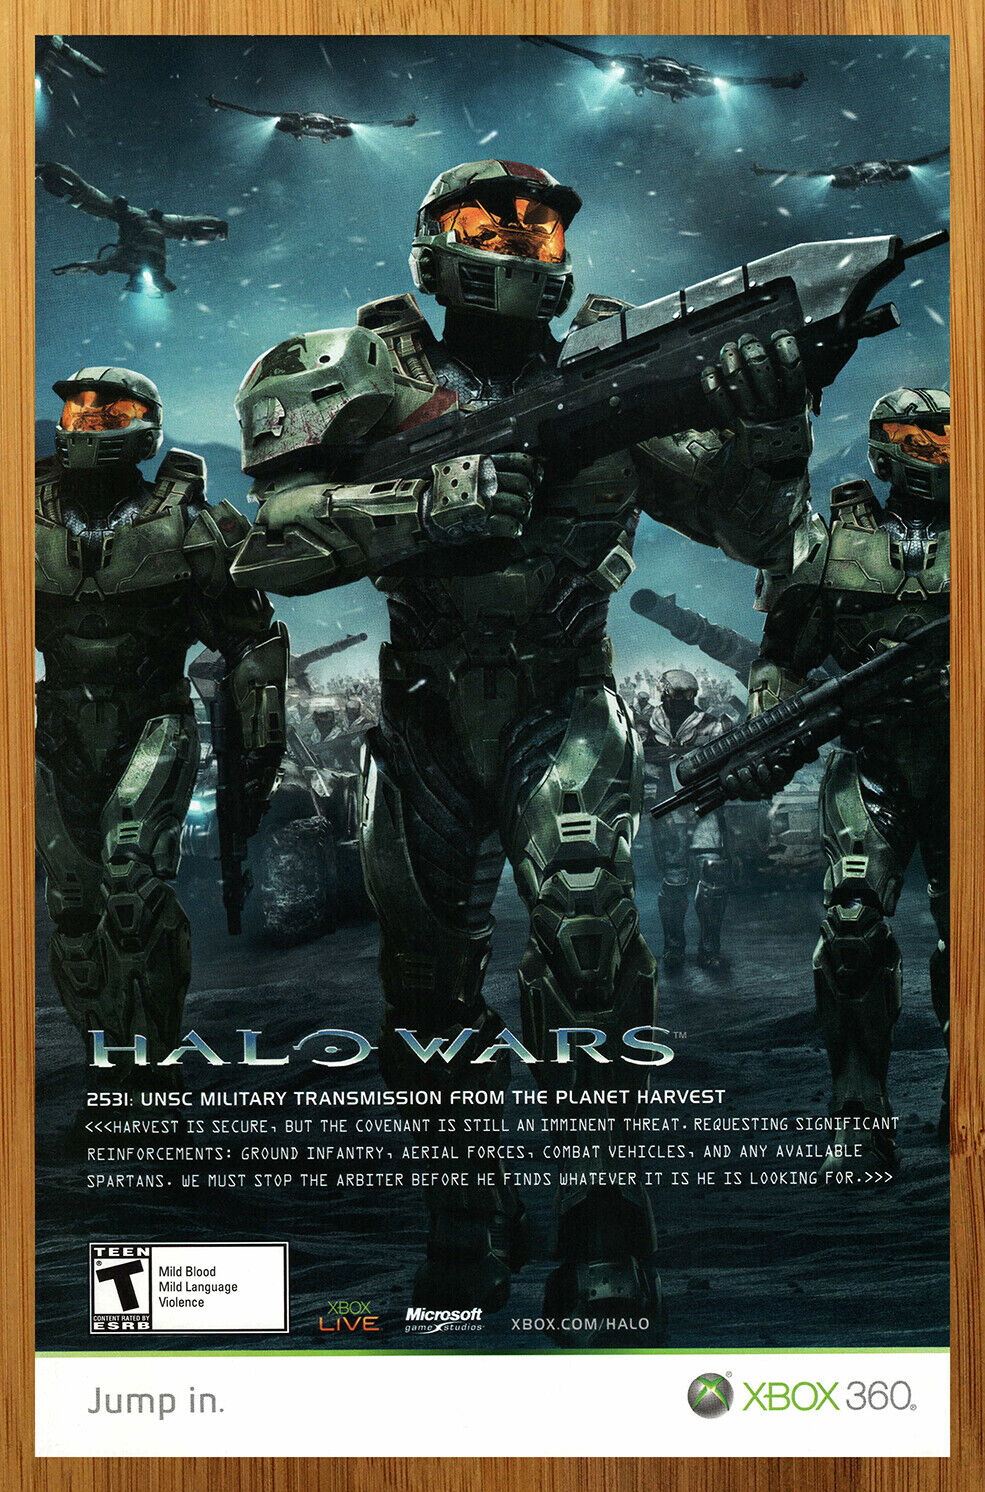 2009 Halo Wars Xbox 360 PC Print Ad/Poster Authentic Official RTS Video Game Art